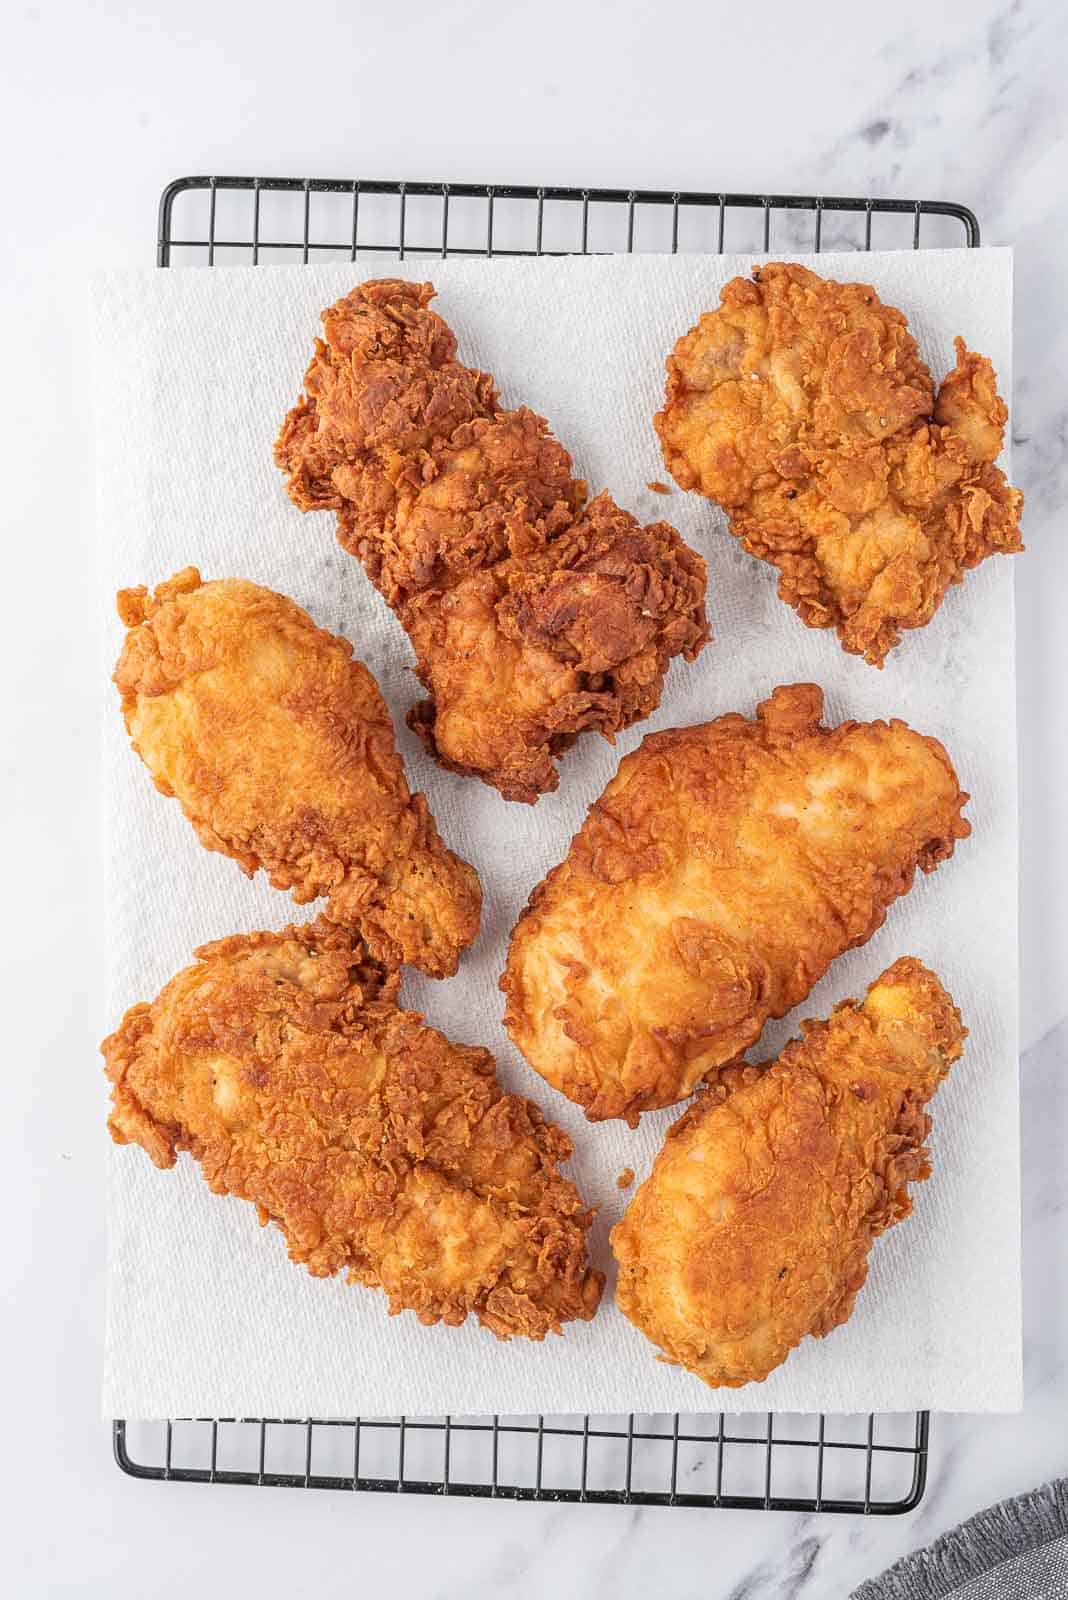 Extra crispy fried chicken draining on paper towels on a wire rack.